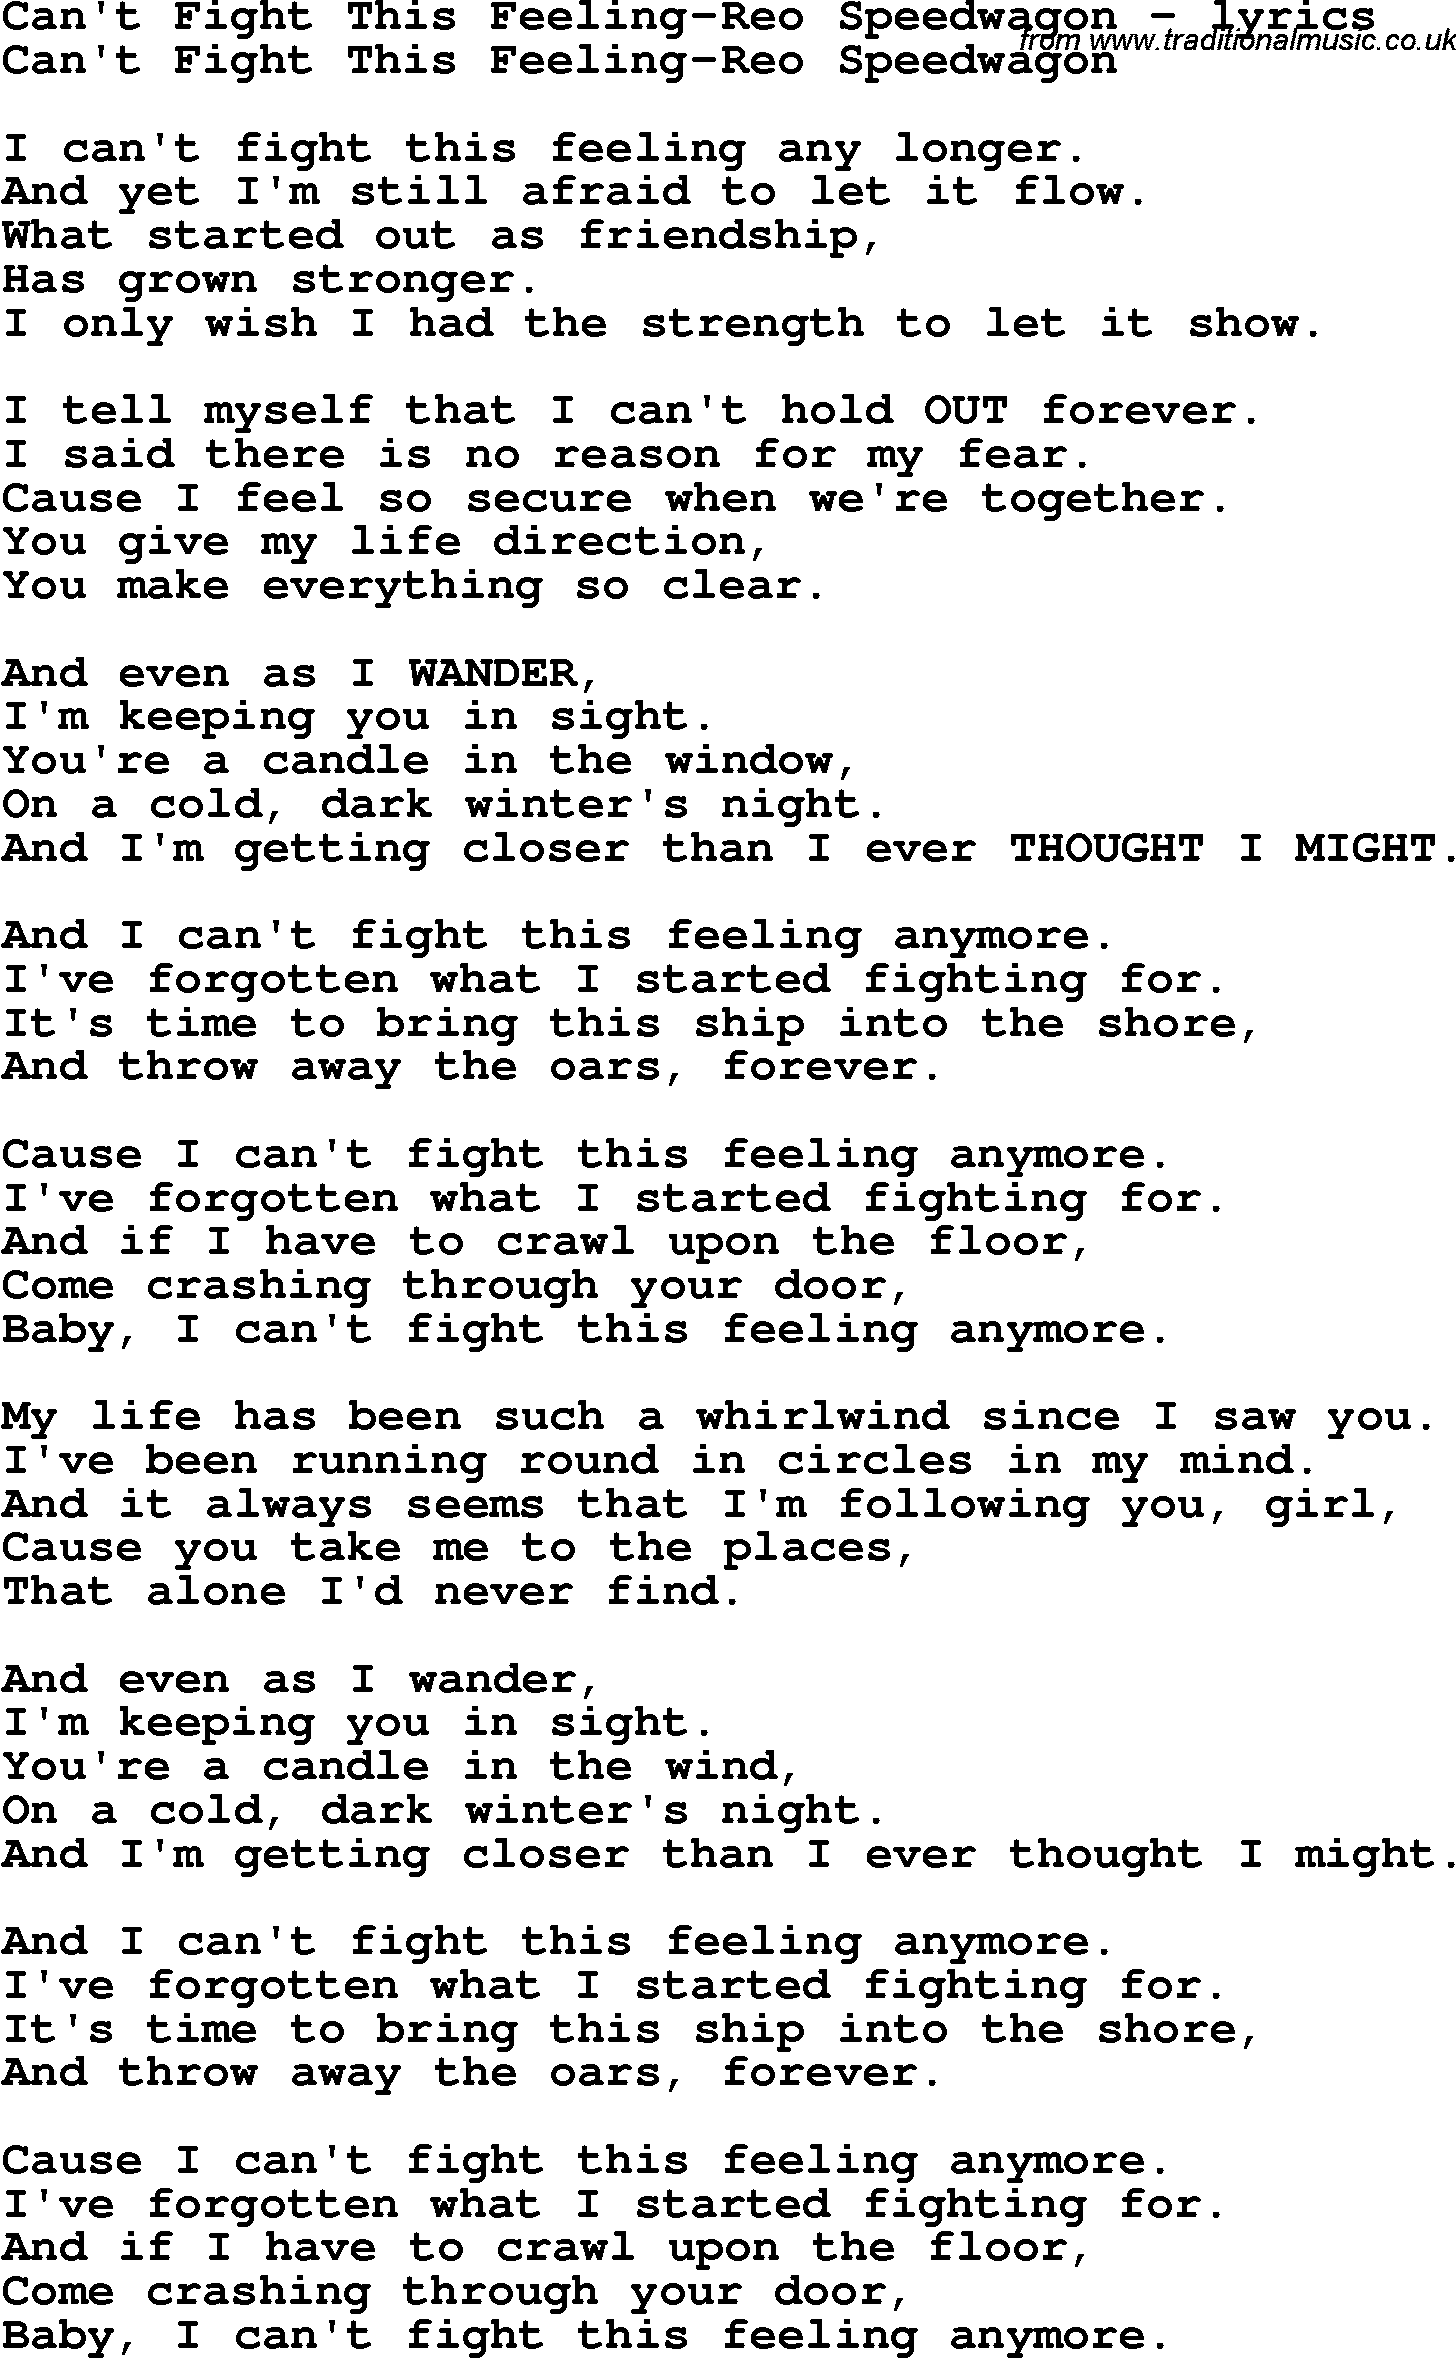 Love Song Lyrics for: Can't Fight This Feeling-Reo Speedwagon